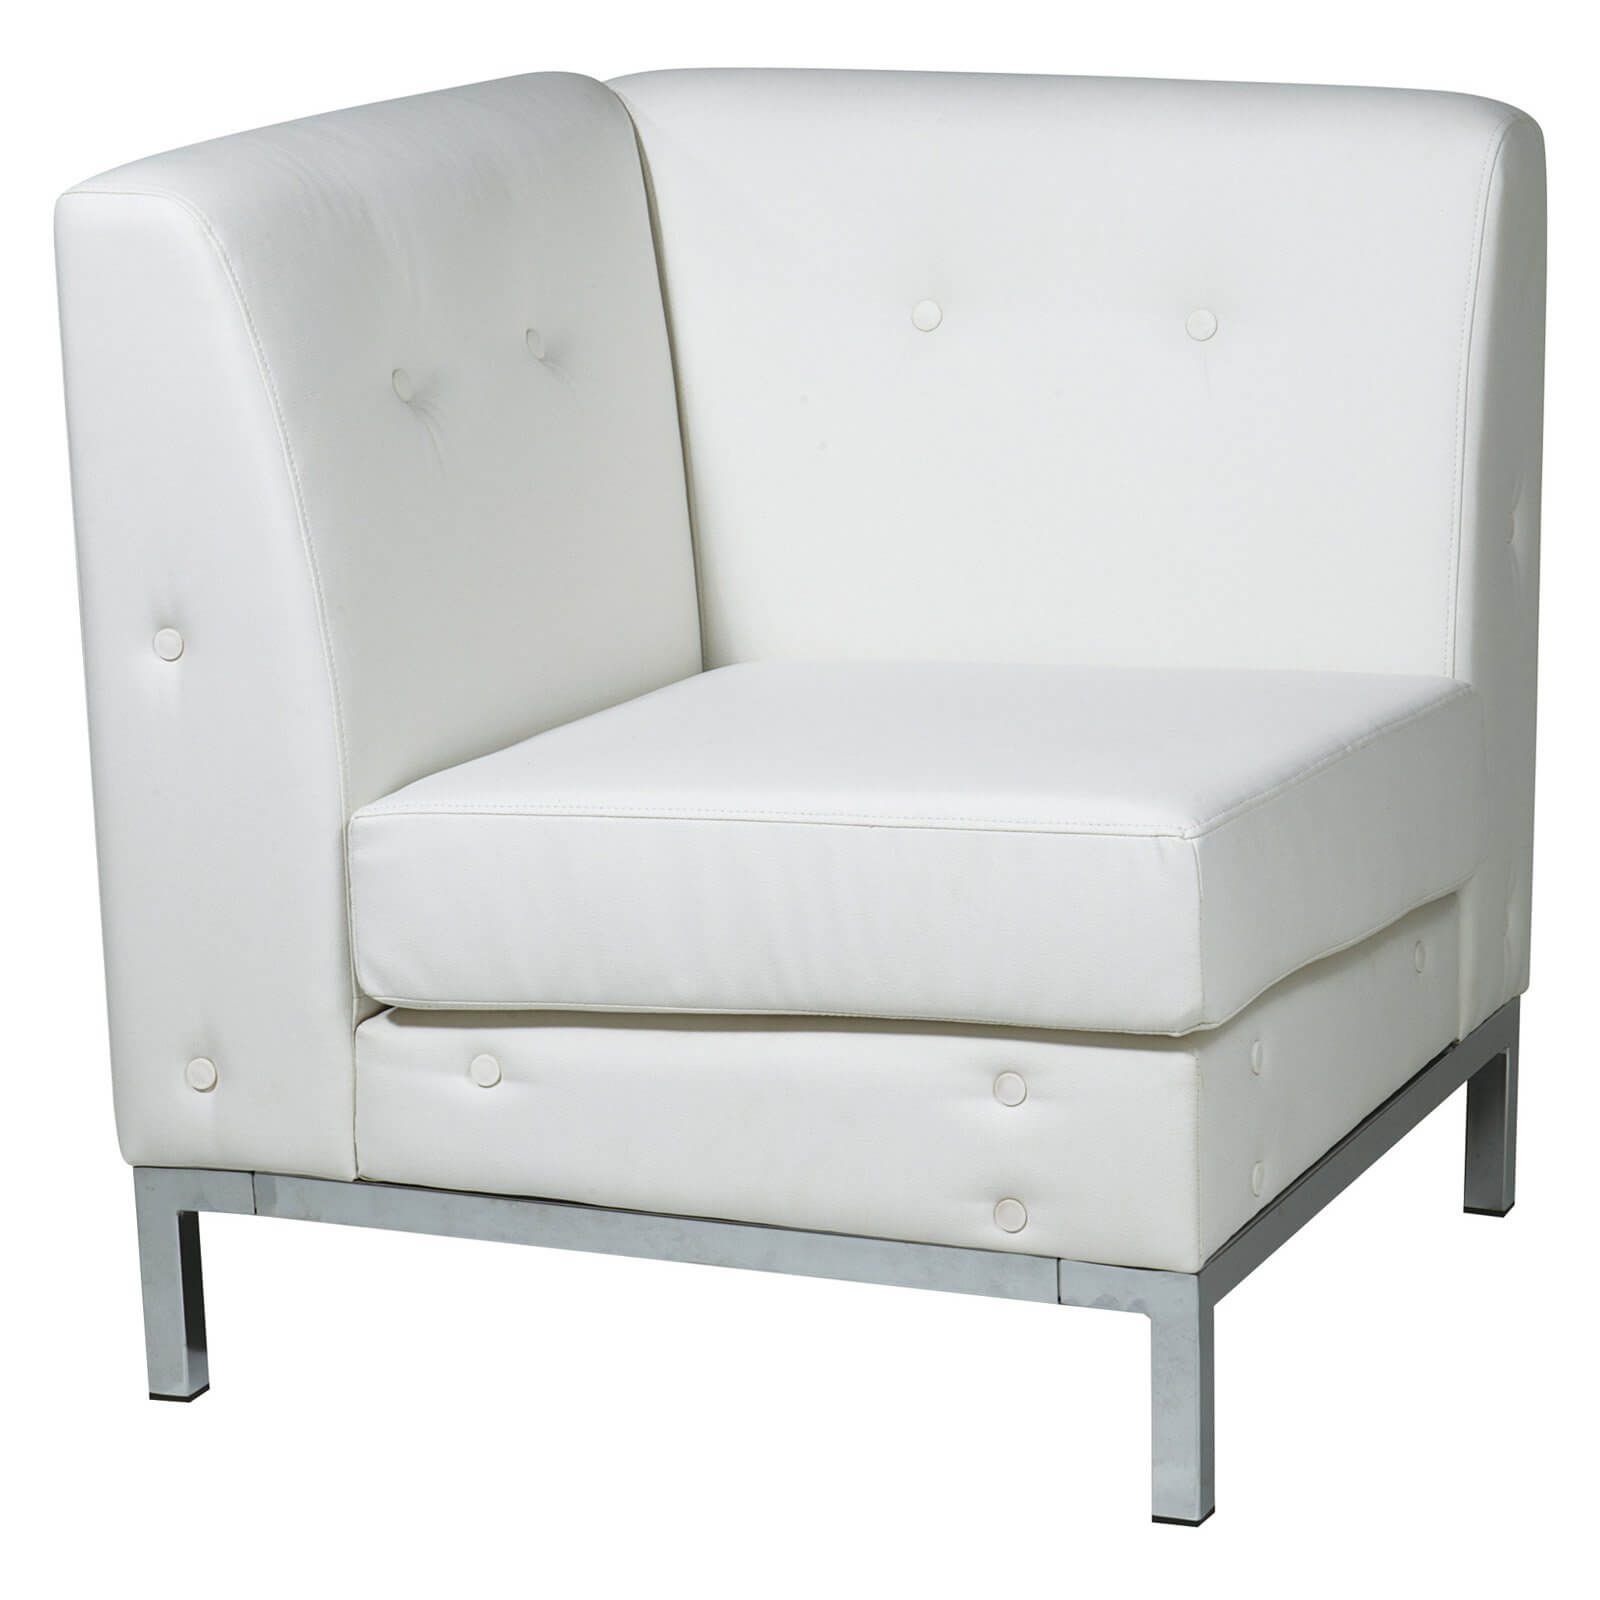 37 White Modern Accent Chairs For The Living Room Regarding White Textured Round Accent Stools (View 19 of 20)